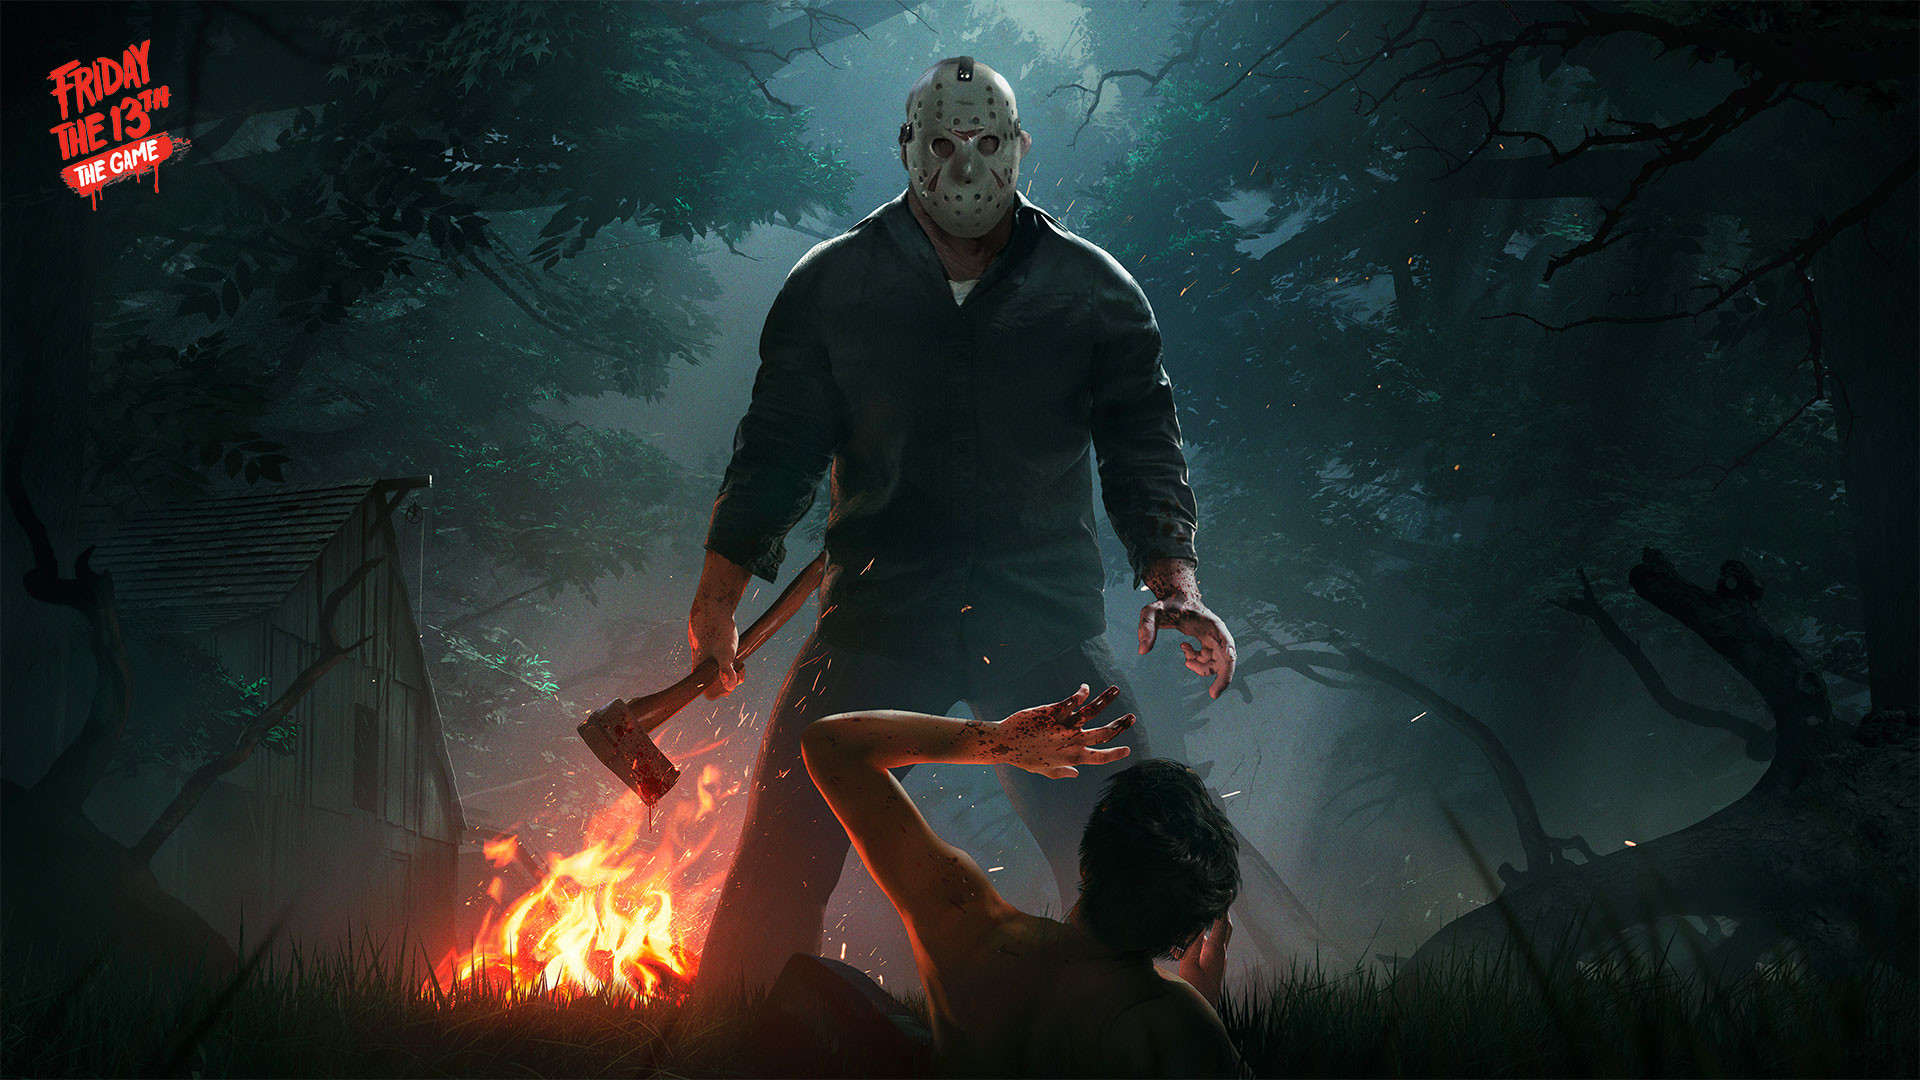 1920x1080 Friday the 13th the game 4K Wallpaper ...